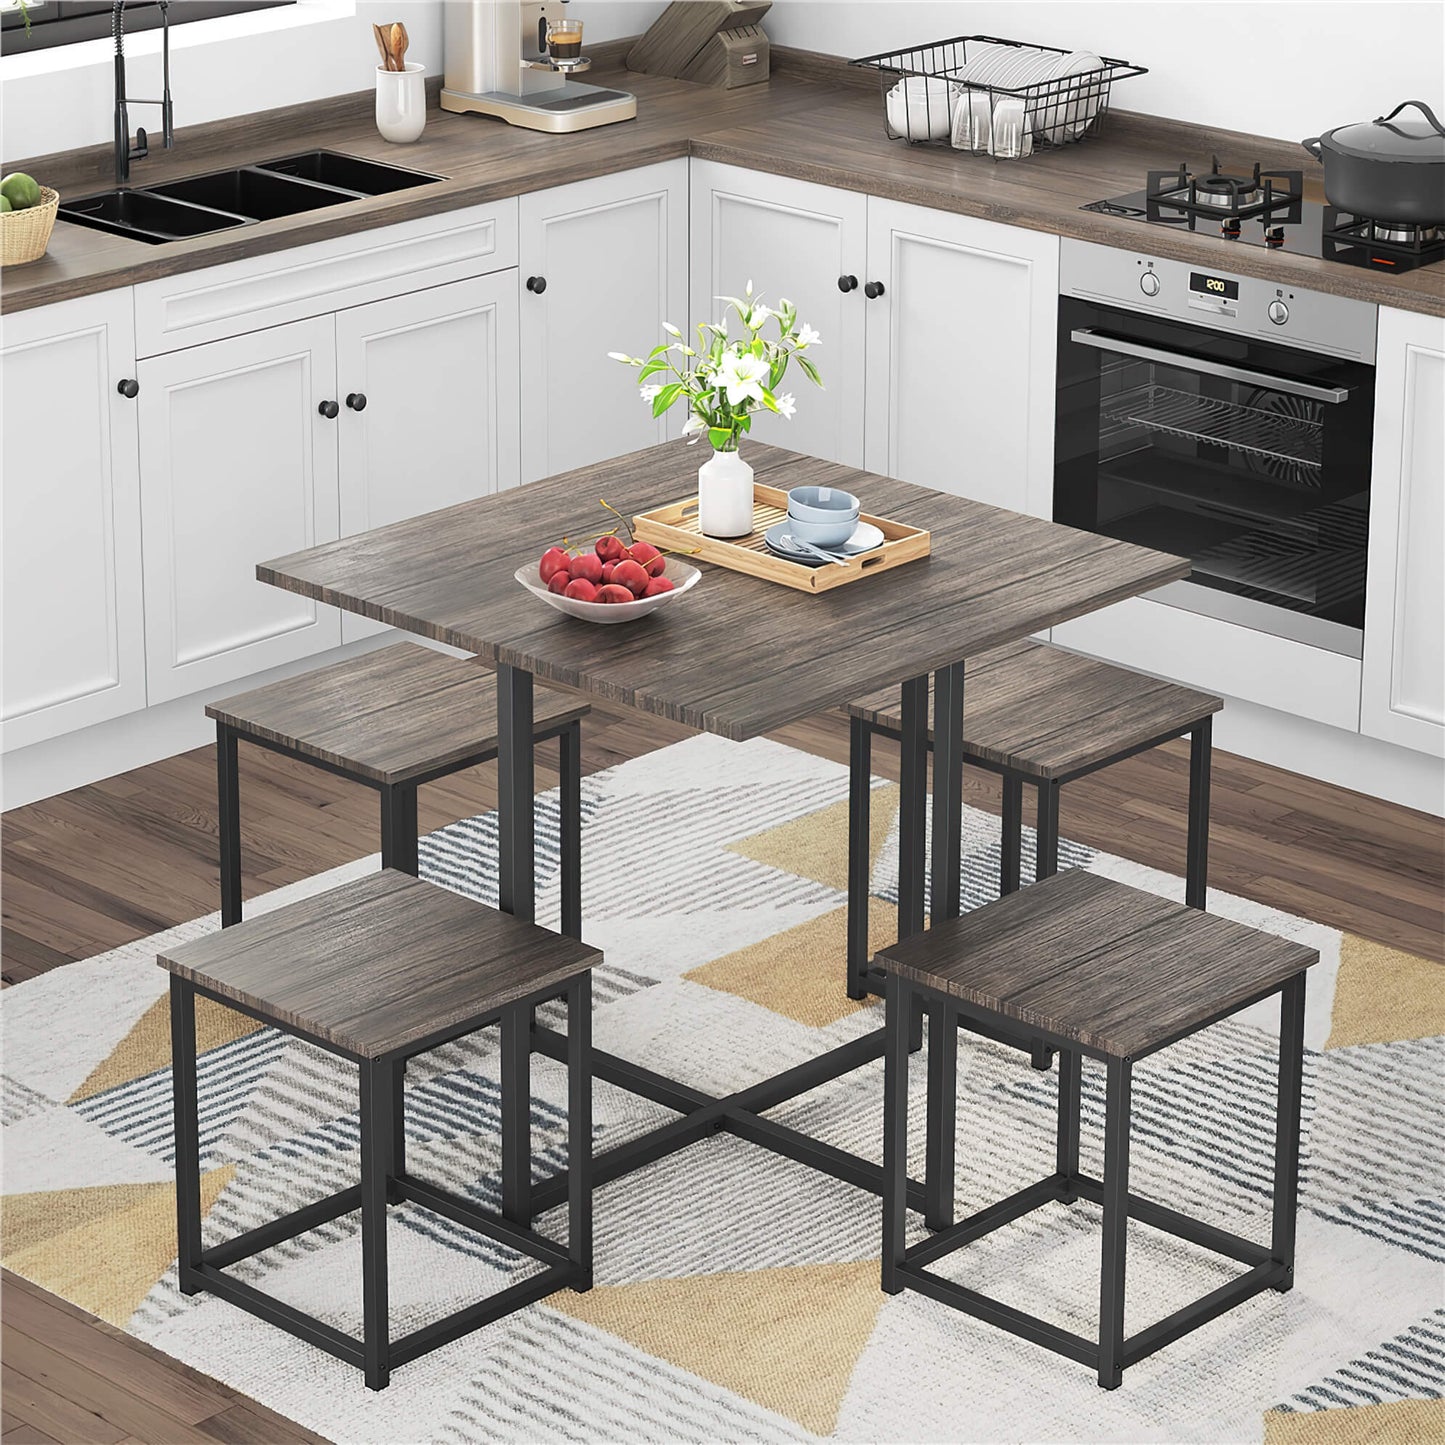 Stylish & Space-Efficient WETA 5 Piece Dining Set with Square Table 4 Backless Stools